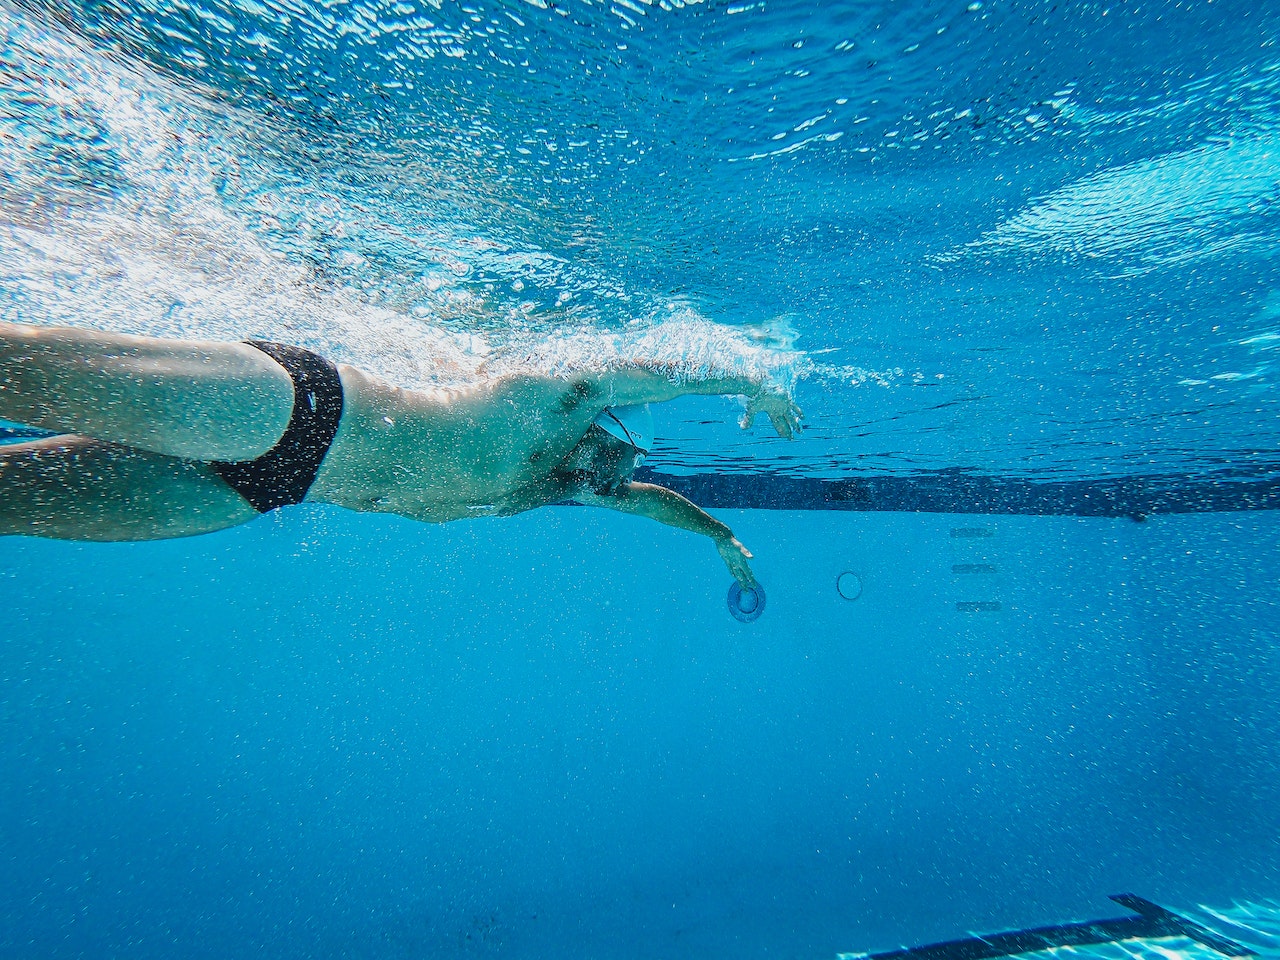 A Swimmer in the Water